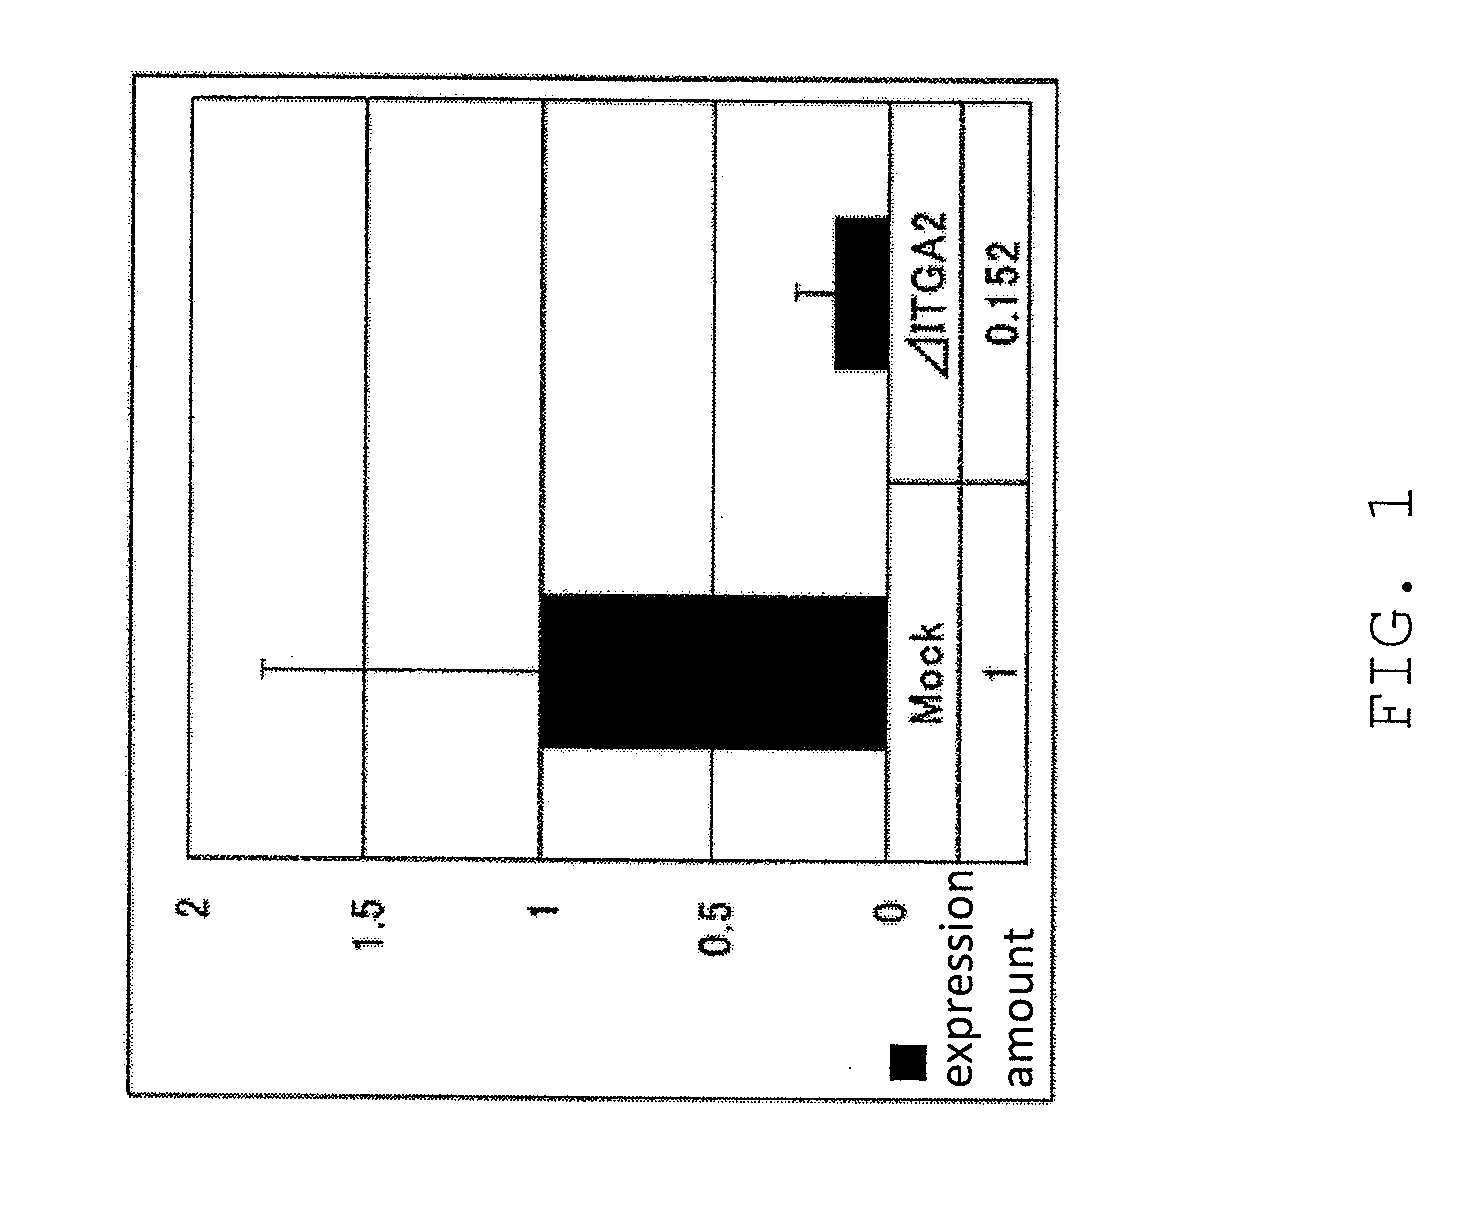 Method of evaluating antiwrinkle substance and method of assessing the skin